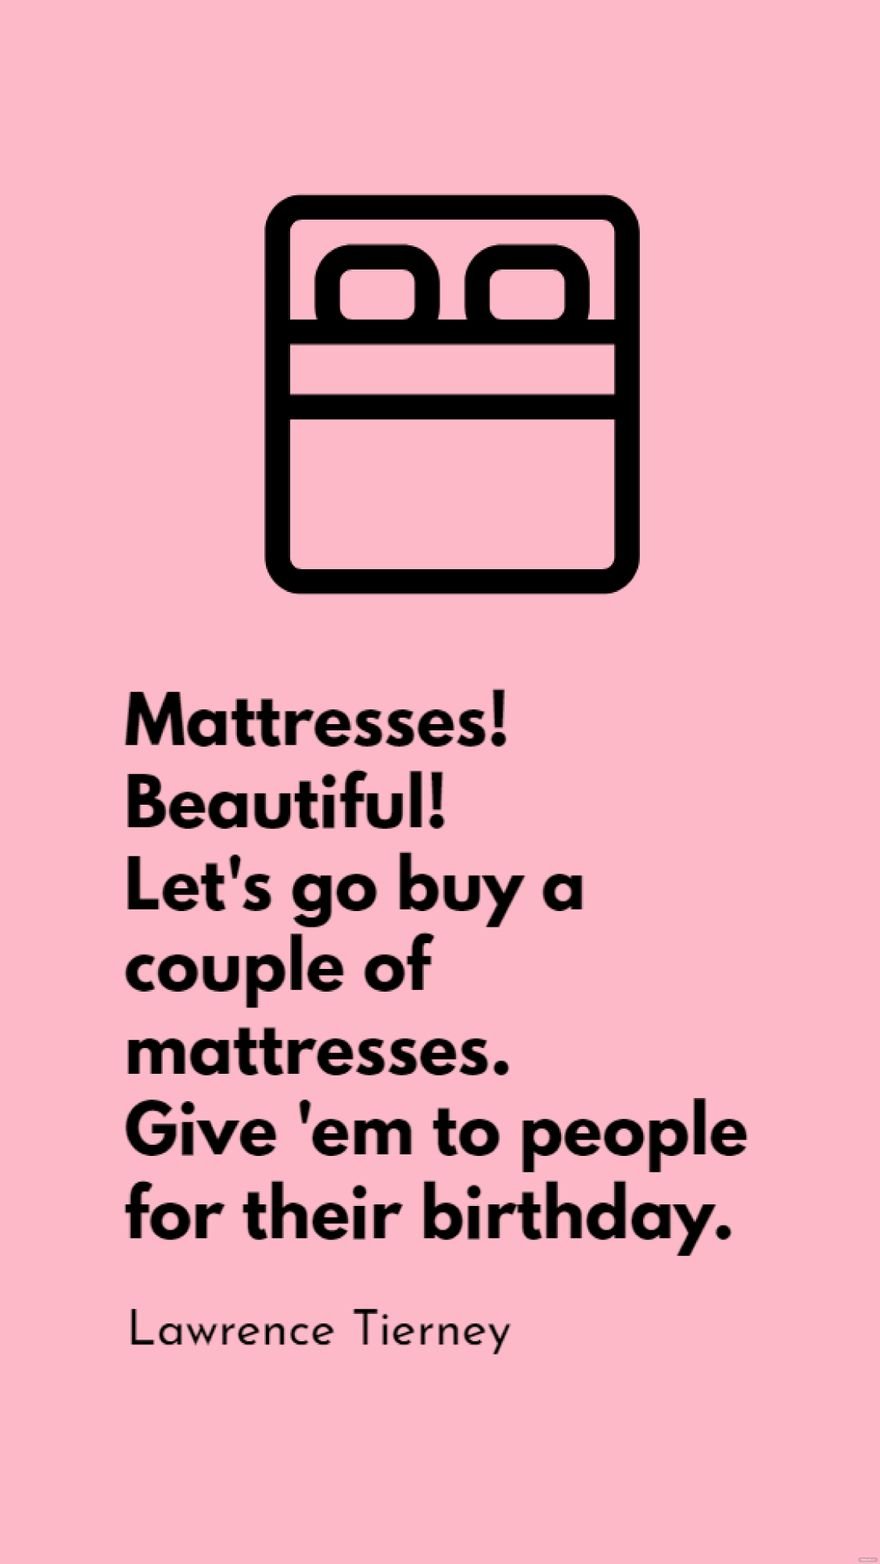 Free Lawrence Tierney - Mattresses! Beautiful! Let's go buy a couple of mattresses. Give 'em to people for their birthday.